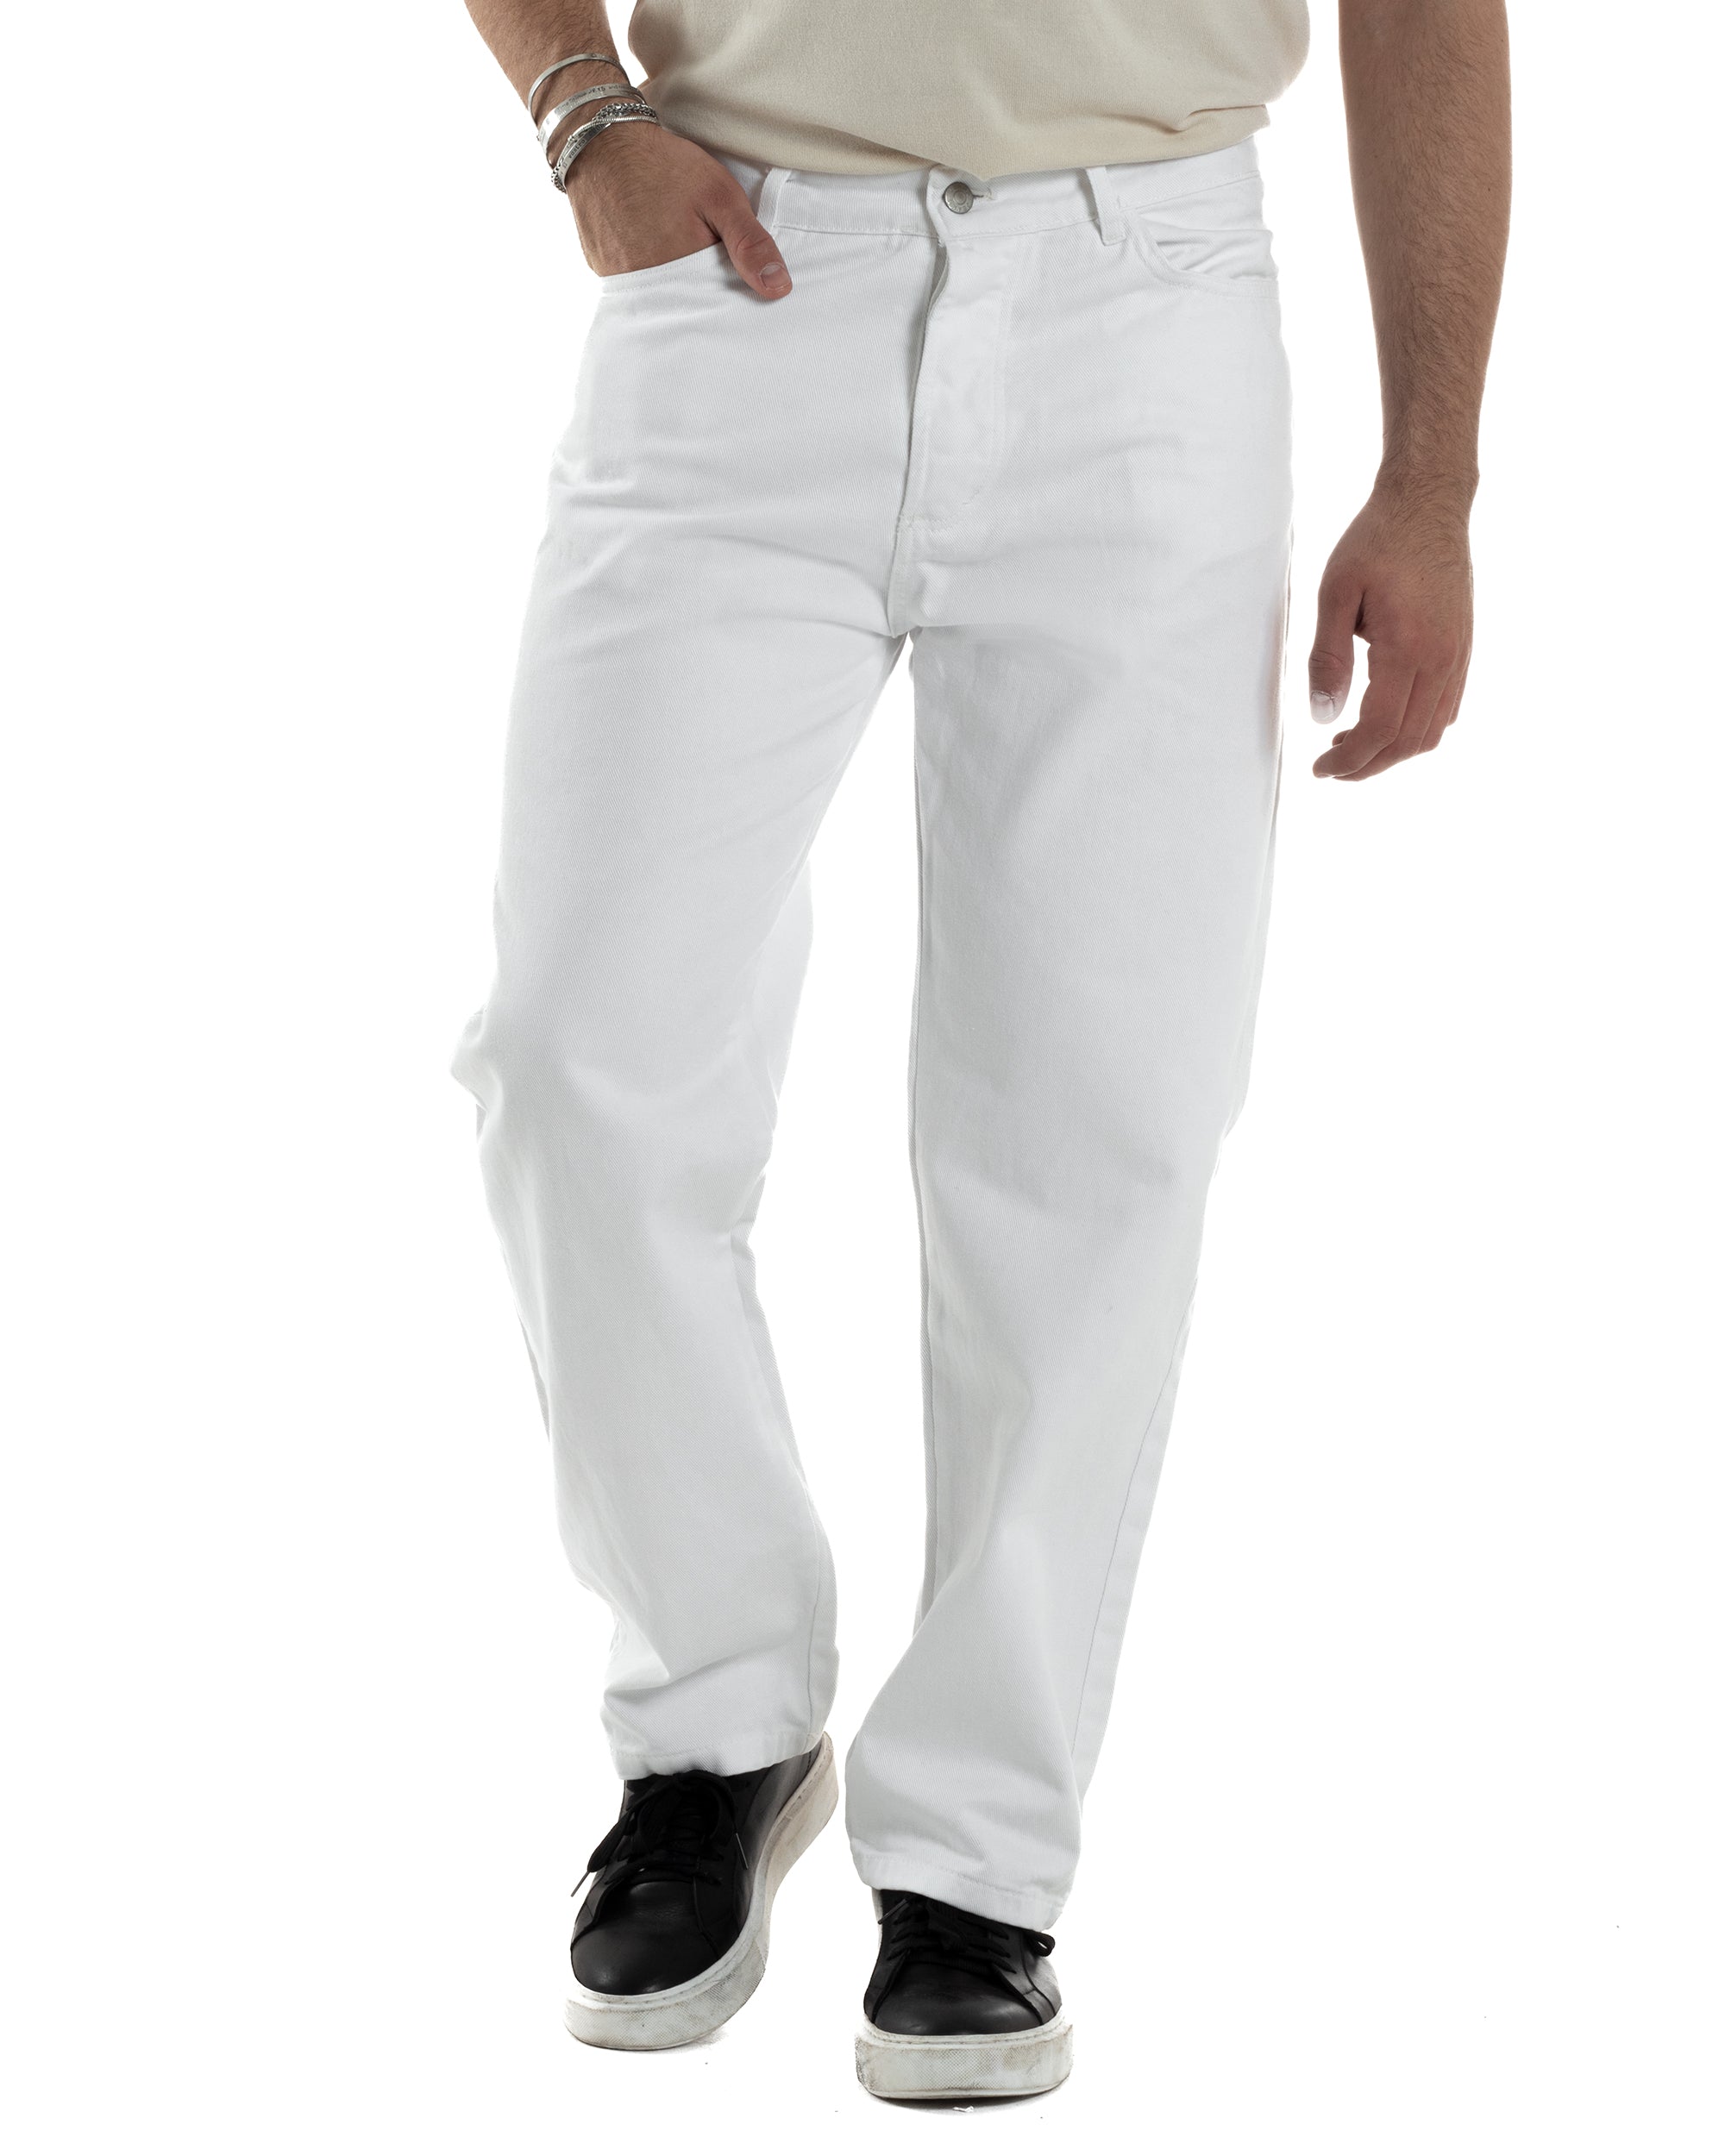 Pantaloni Uomo Jeans Straight Fit Baggy Basic Cinque Tasche Bianco GIOSAL-JS1039A